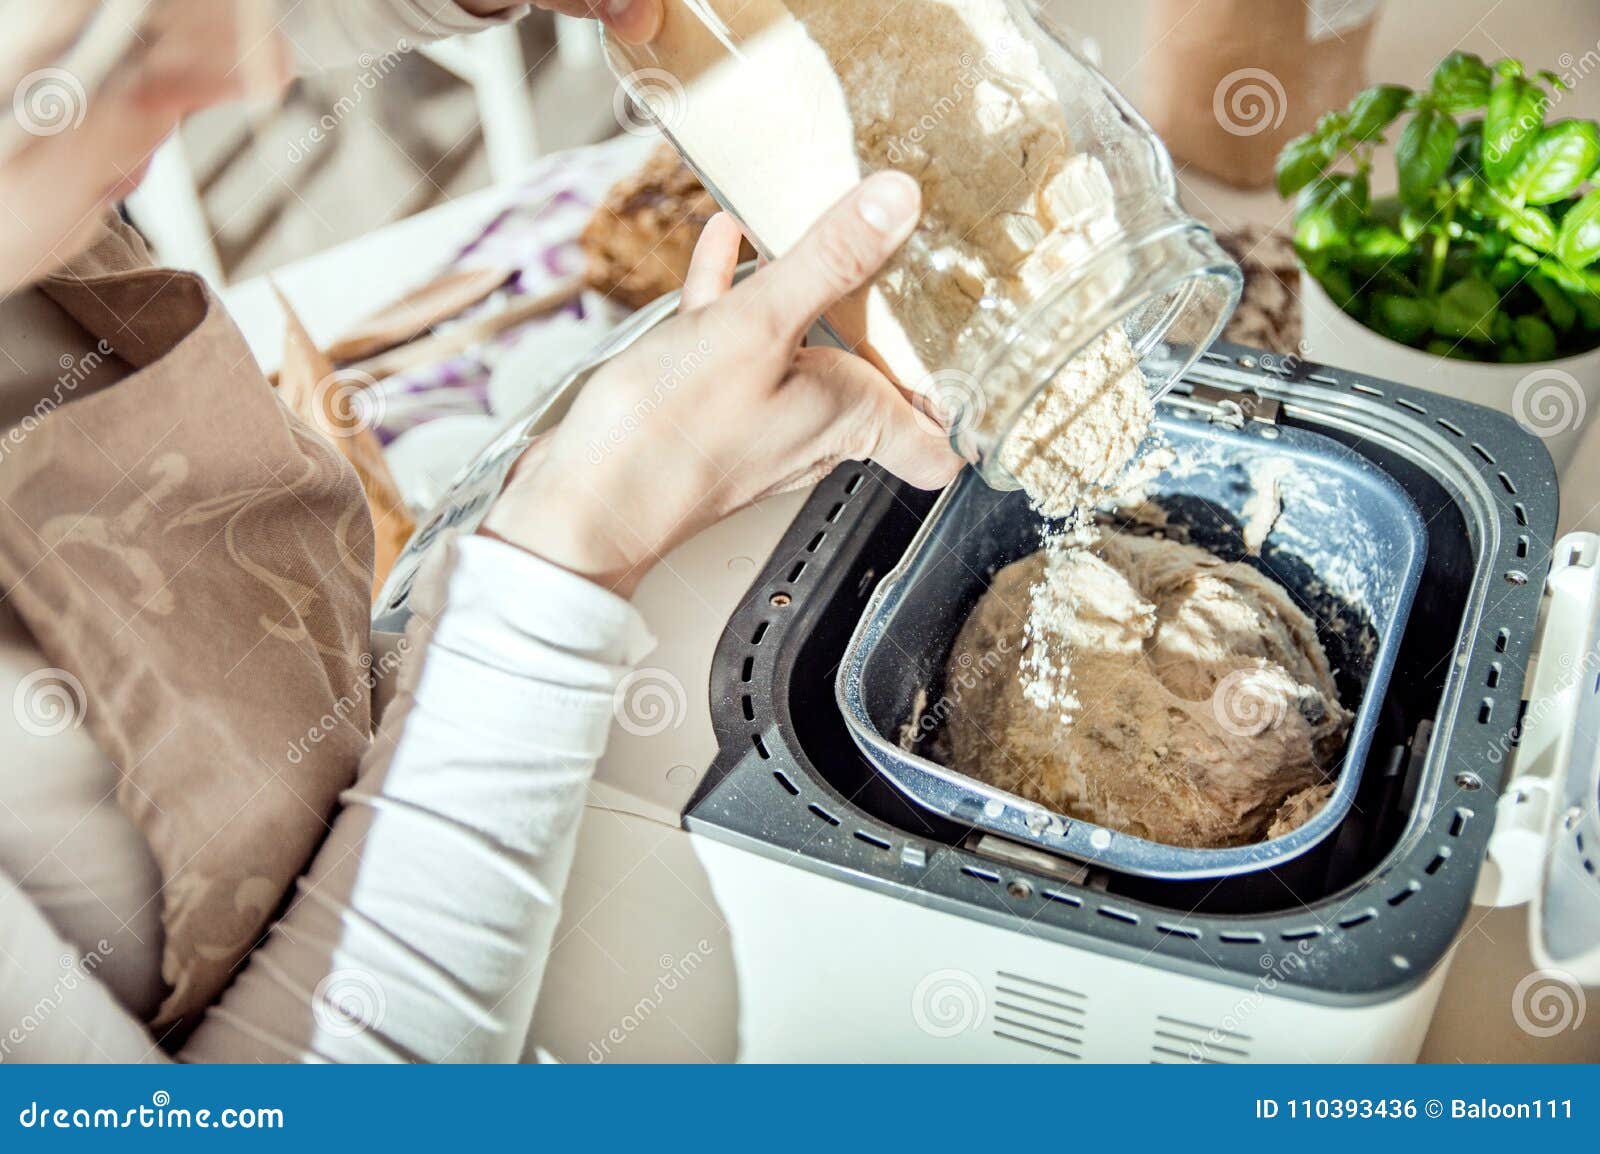 woman pours ingredients into the bread maker machine